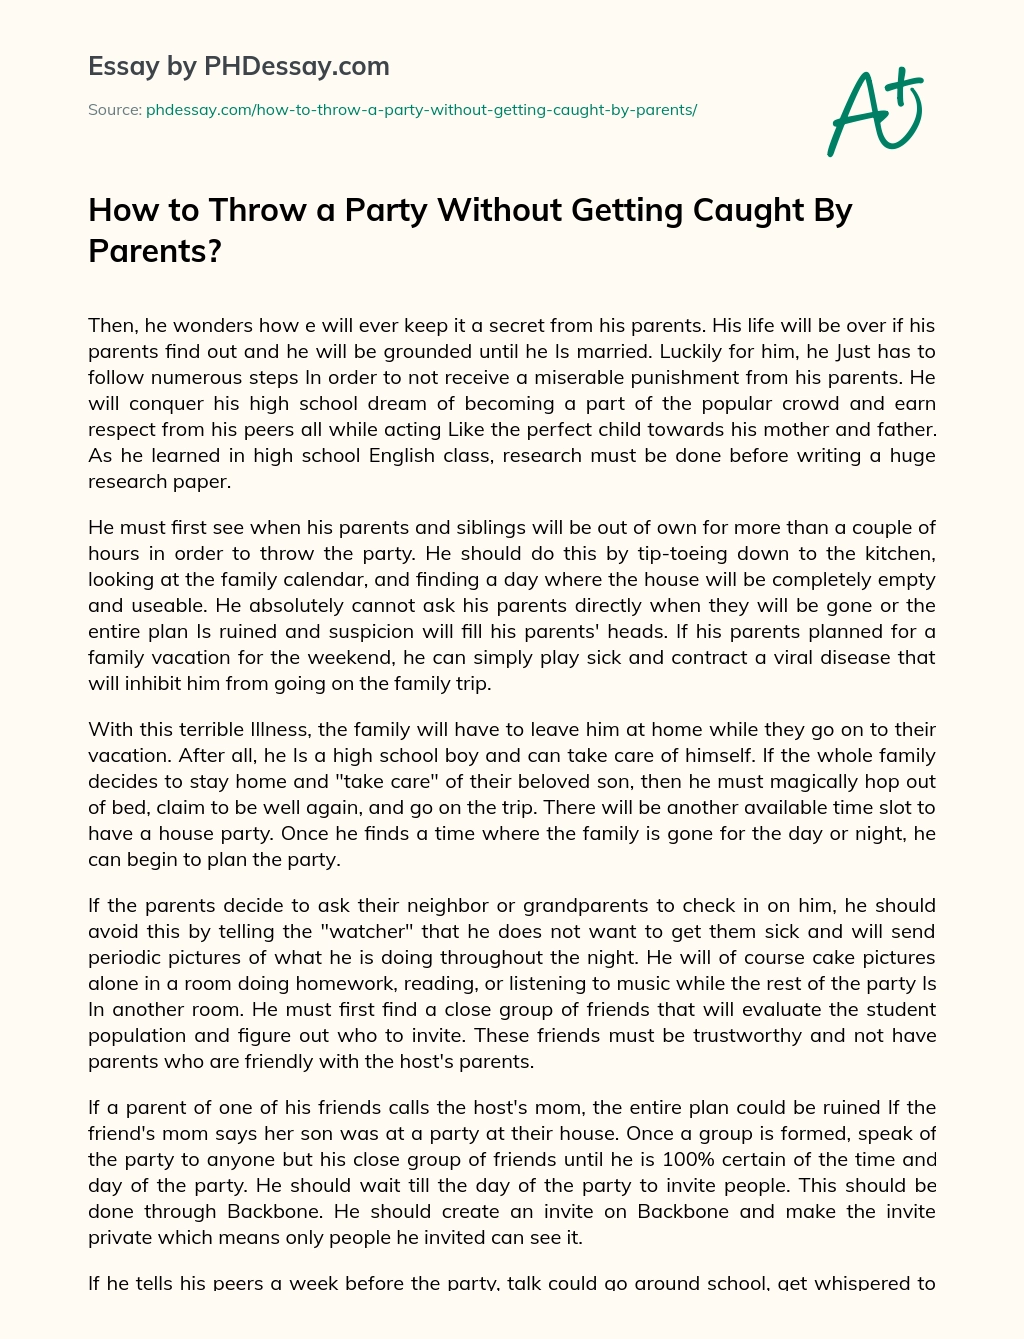 How to Throw a Party Without Getting Caught By Parents? essay